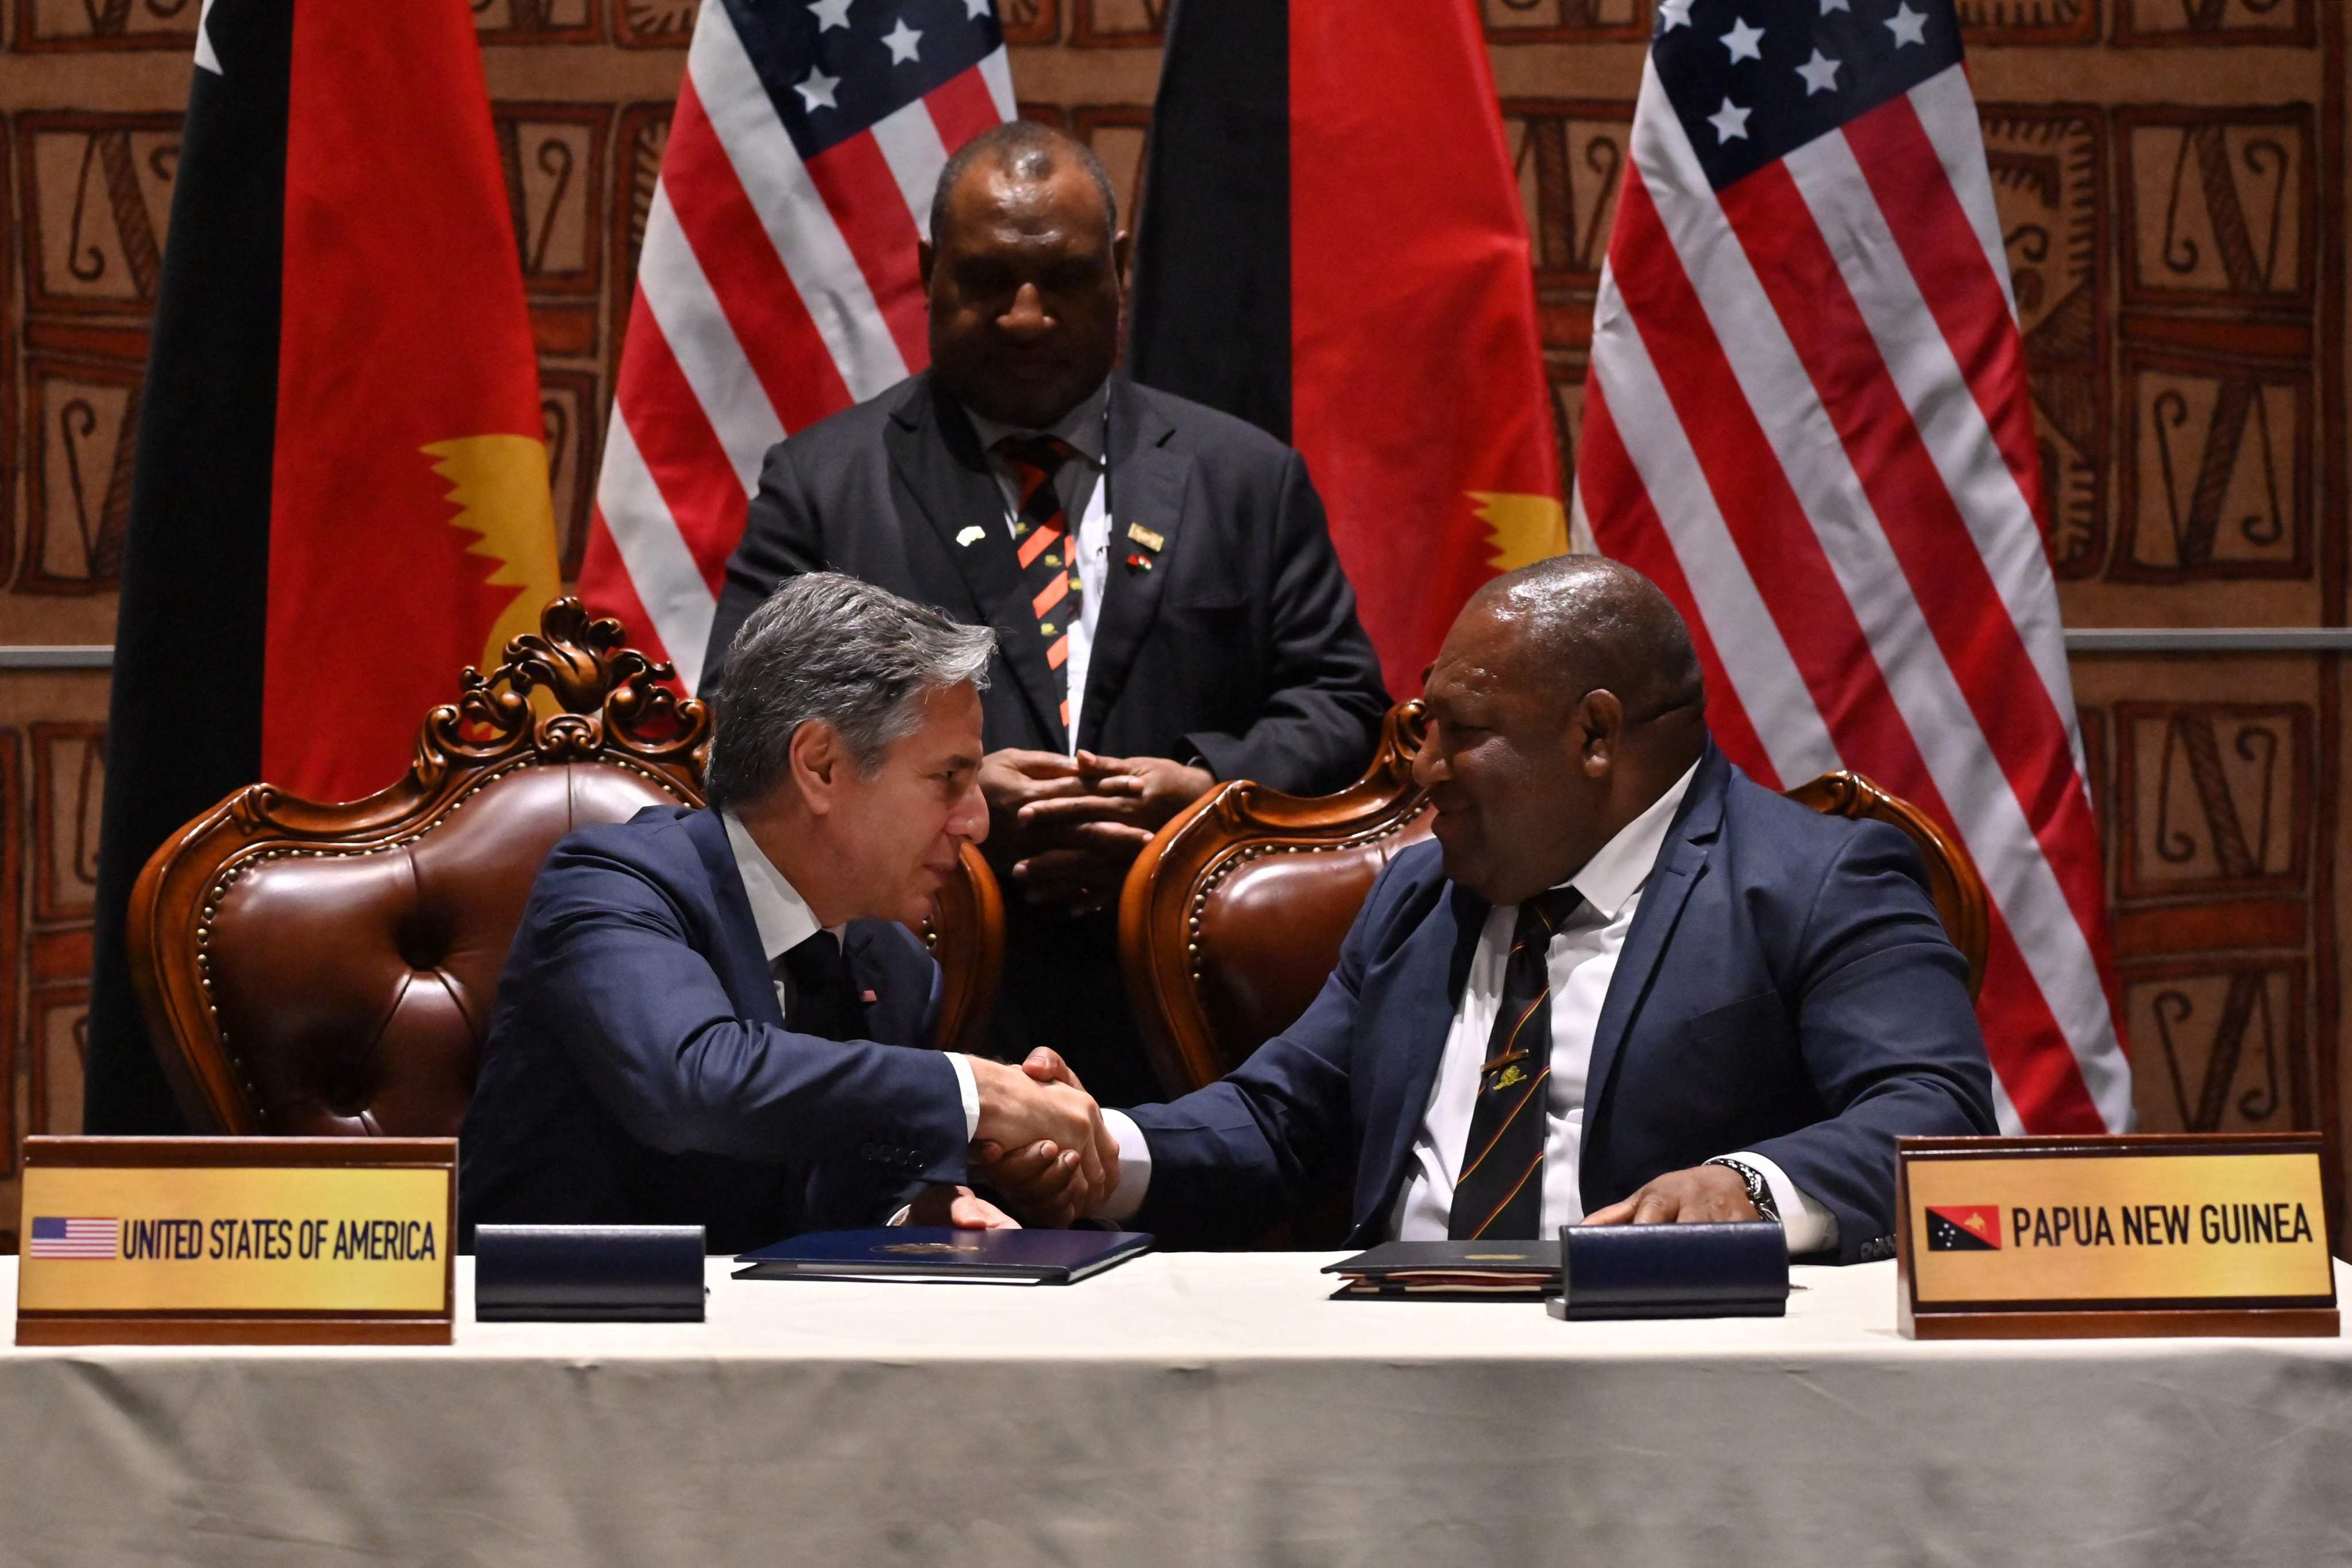 US Secretary of State Antony Blinken (left) and Papua New Guinea Defence Minister Win Bakri Daki shake hands after signing a security agreement as PNG Prime Minister James Marape looks on, in Port Moresby, on May 22. Photo: AFP